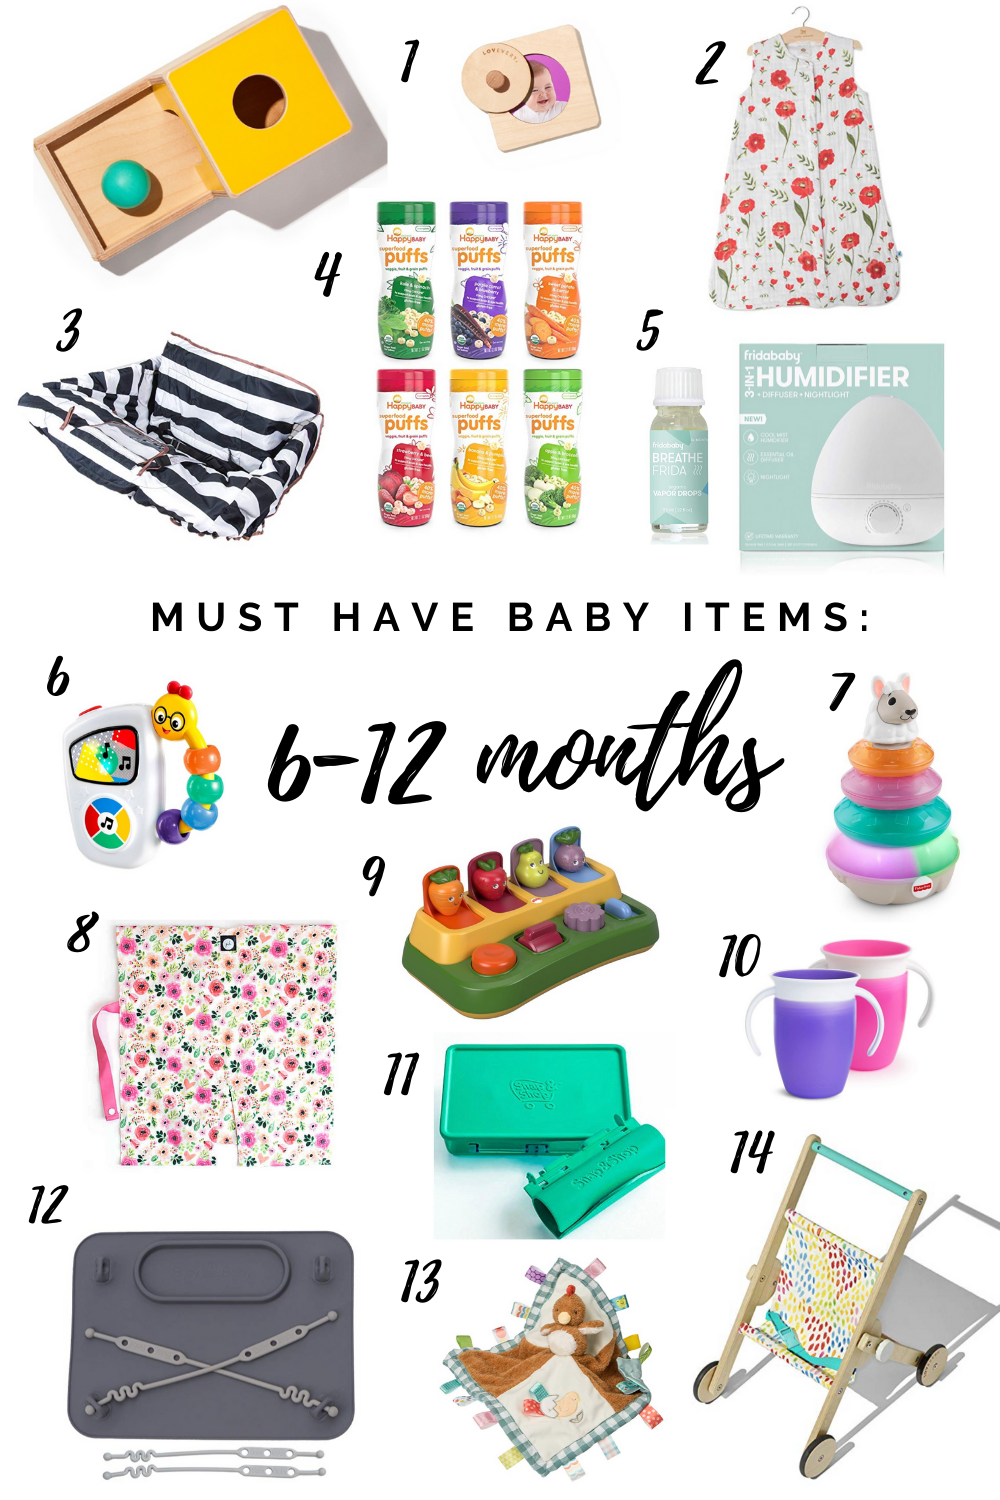 10 Baby Essentials You Need For 6-12 Months (Wish I'd Added These